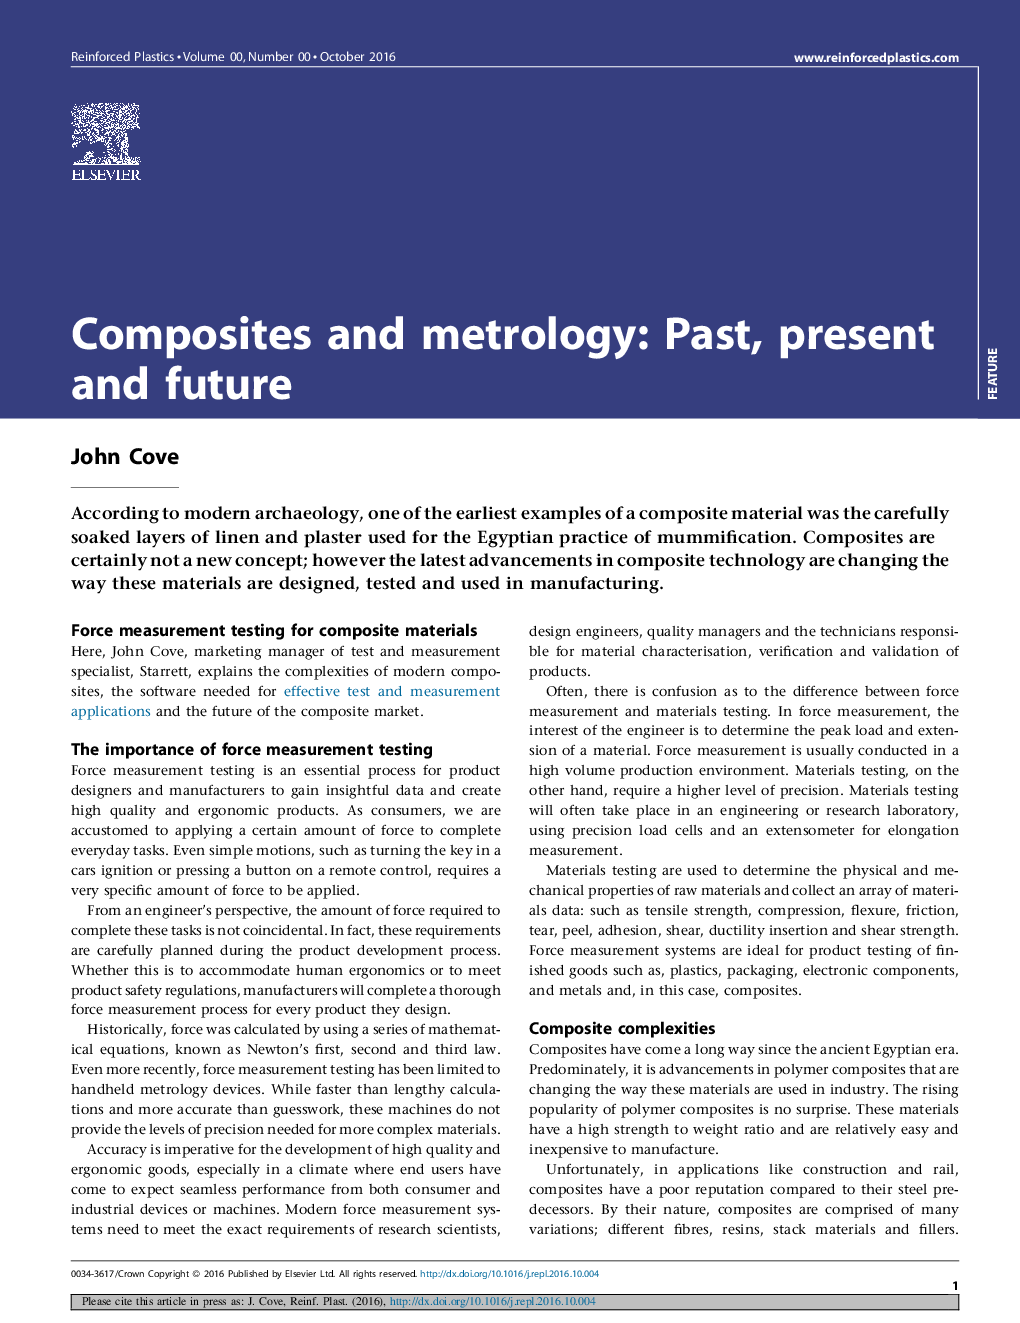 Composites and metrology: Past, present and future